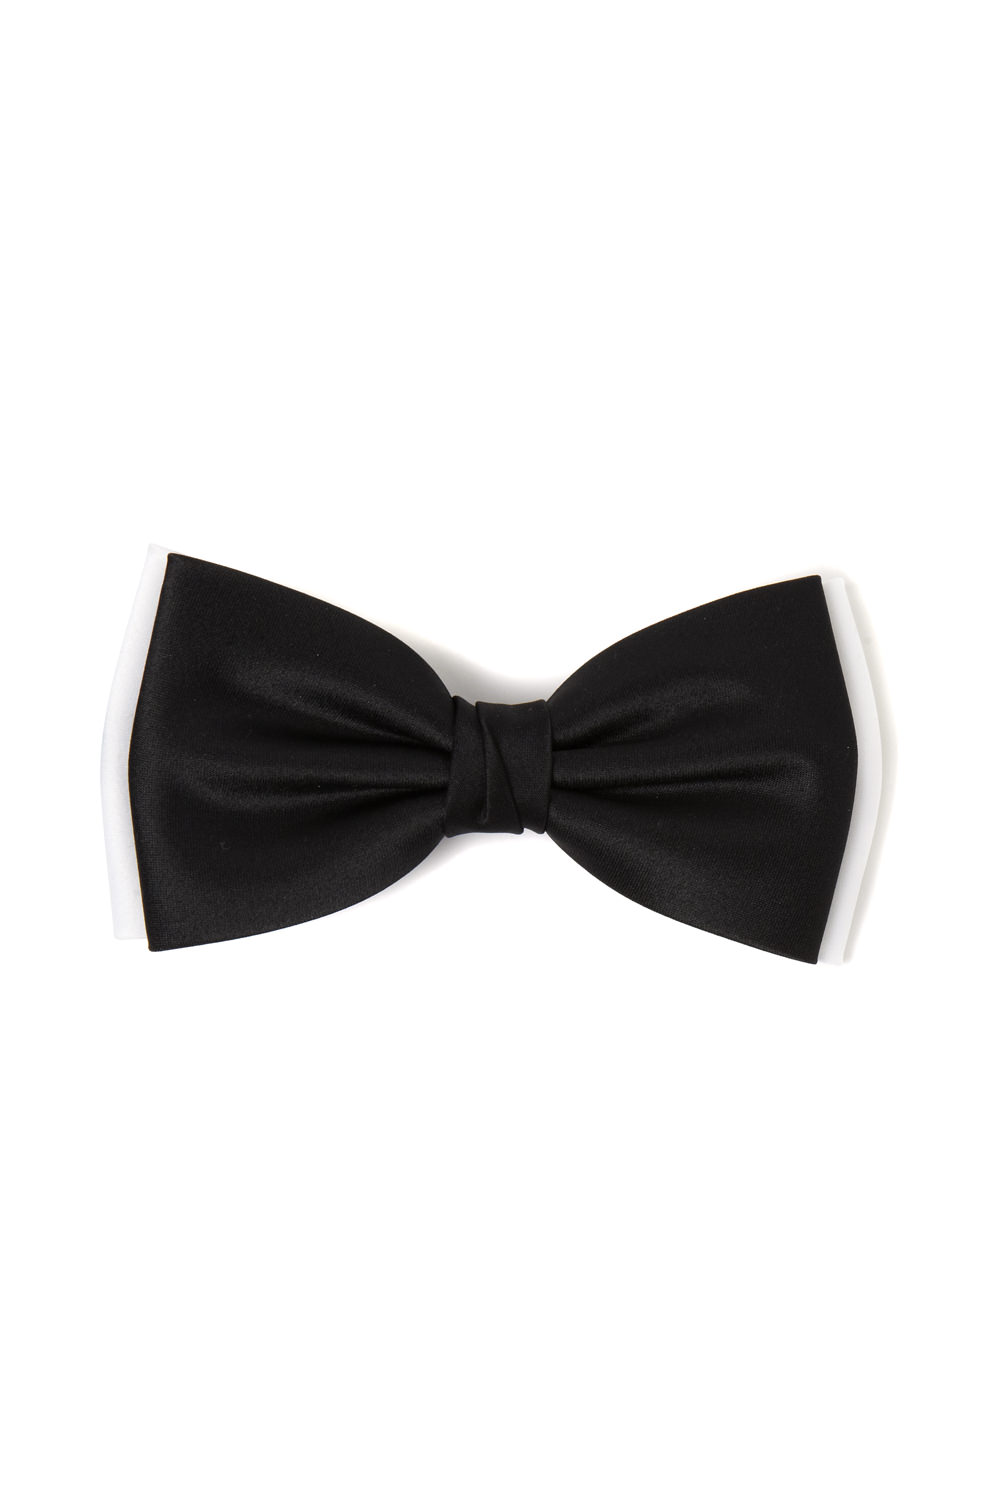       Occasions Ties   Mens Black   White Contrast Bow Tie By Moss Bros